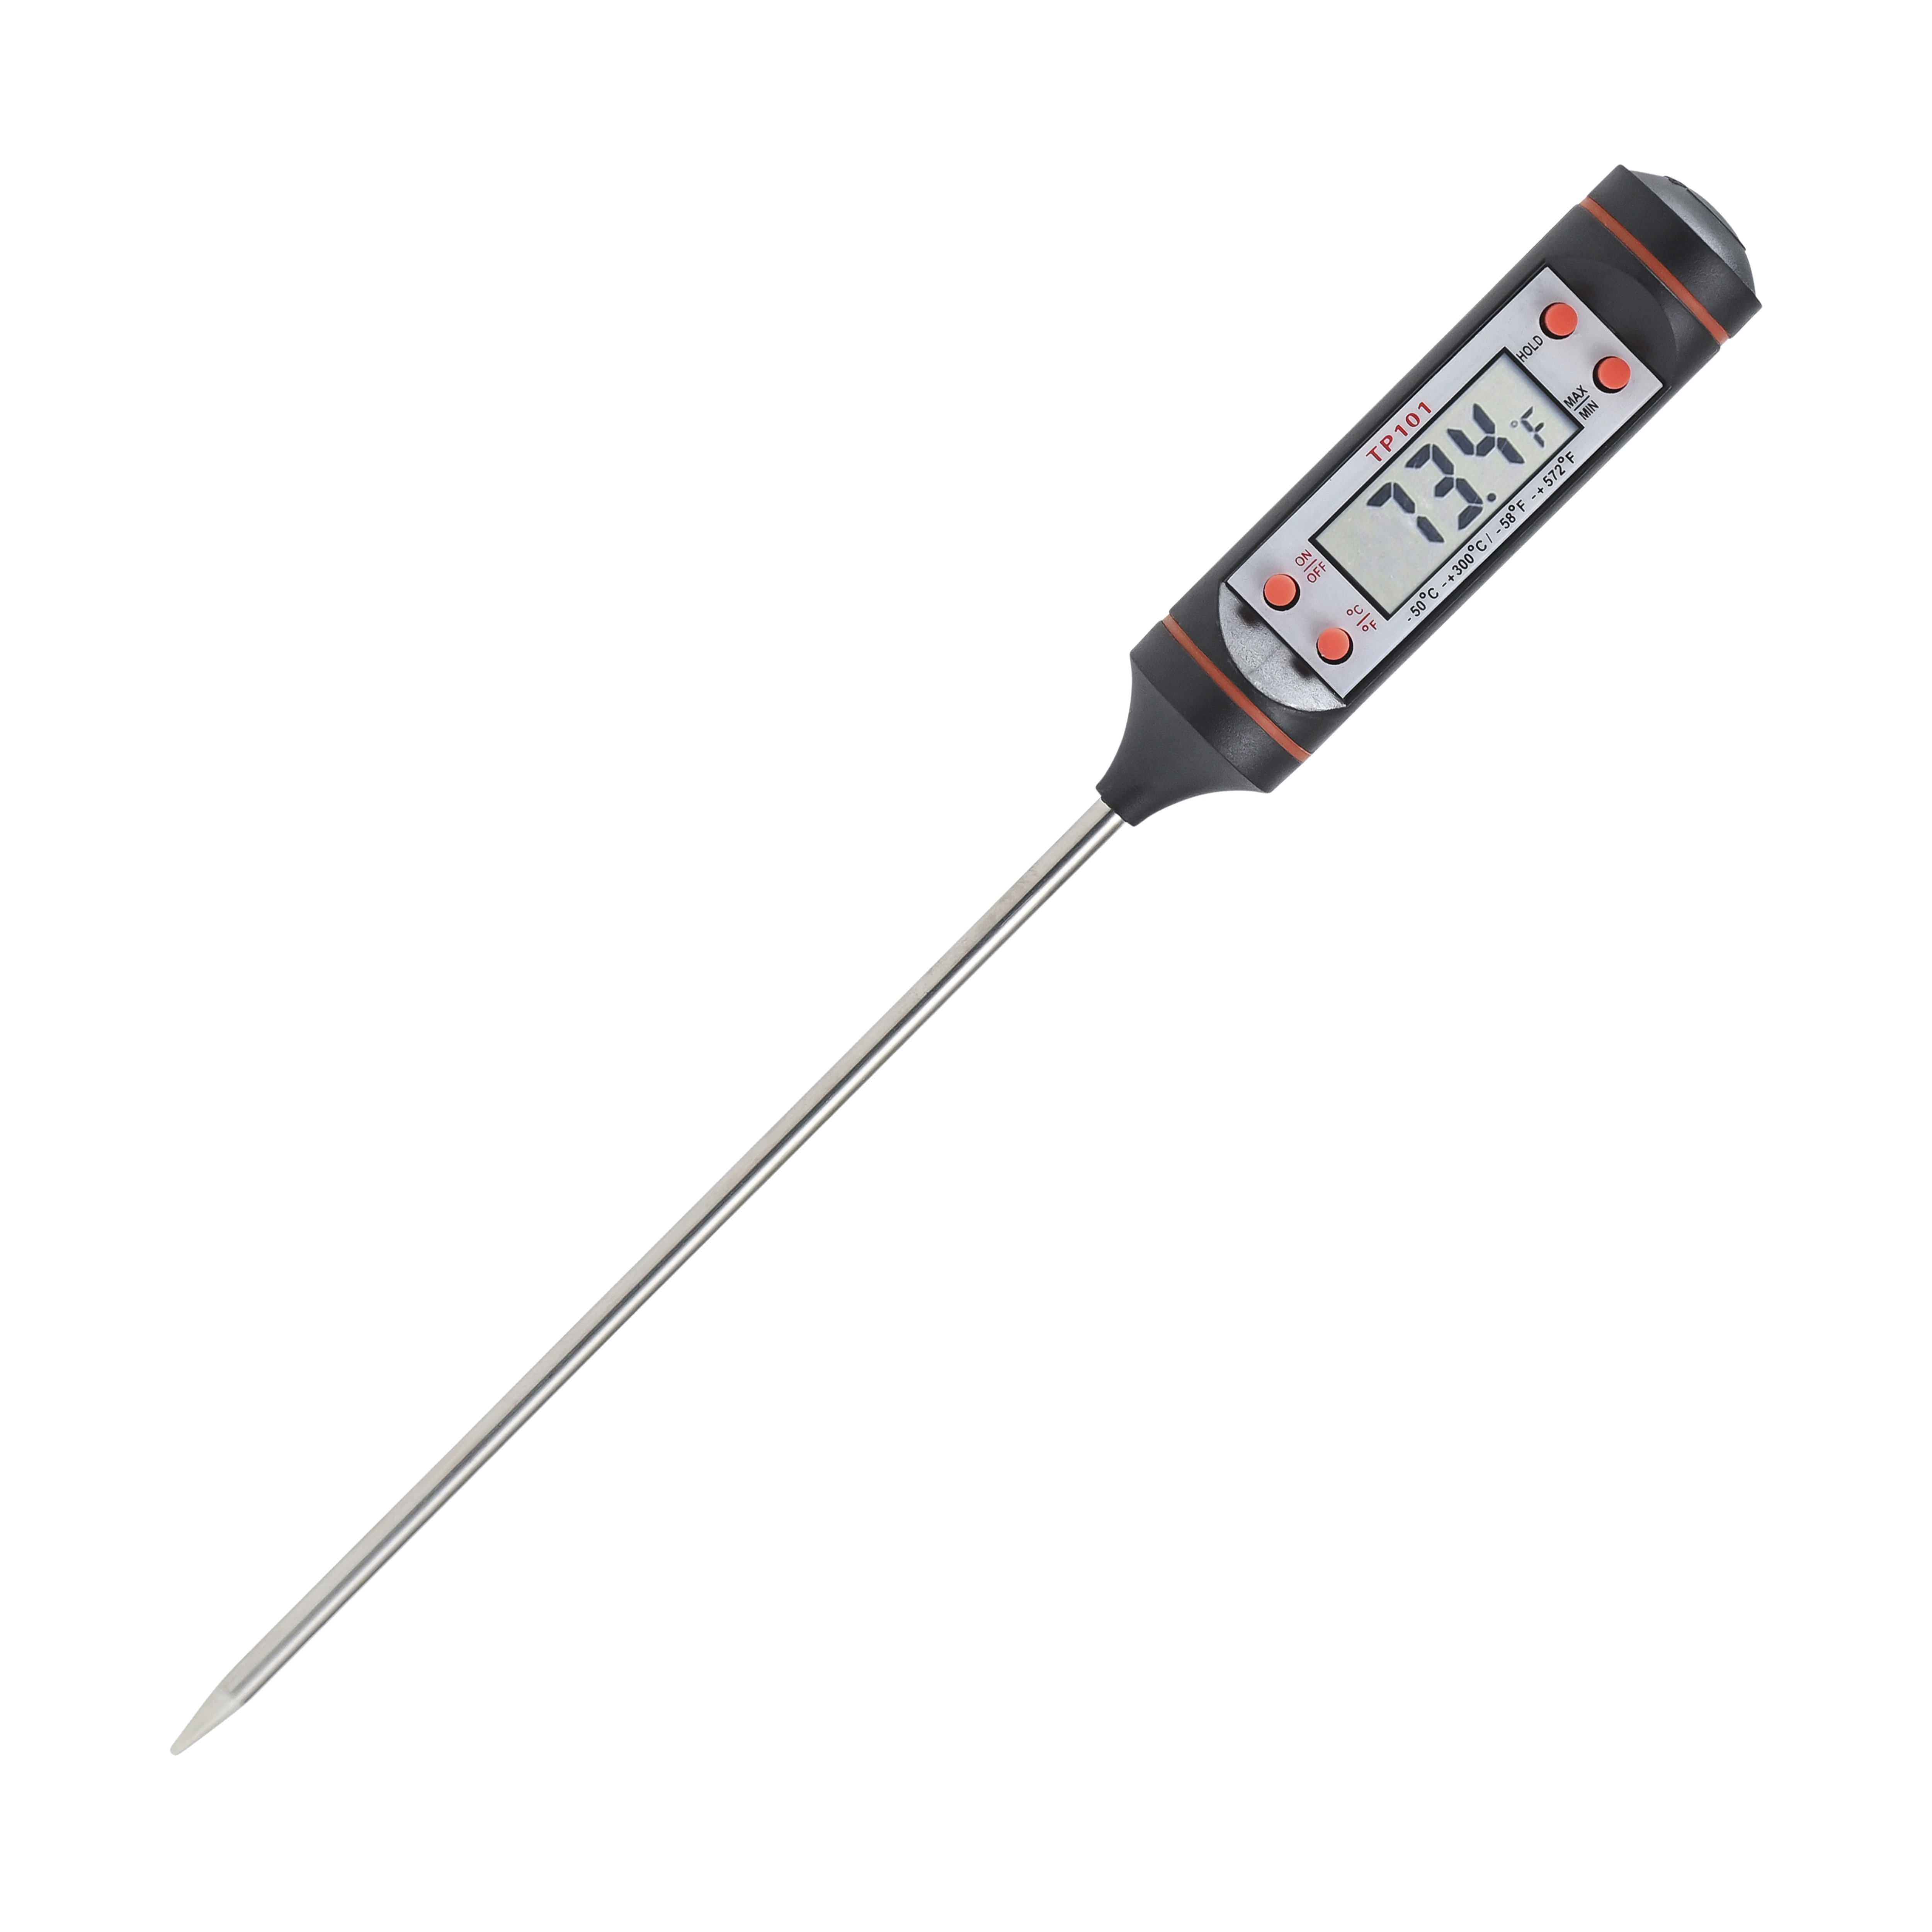 The Only Meat Thermometer You'll Ever Need. No Guesswork. Just